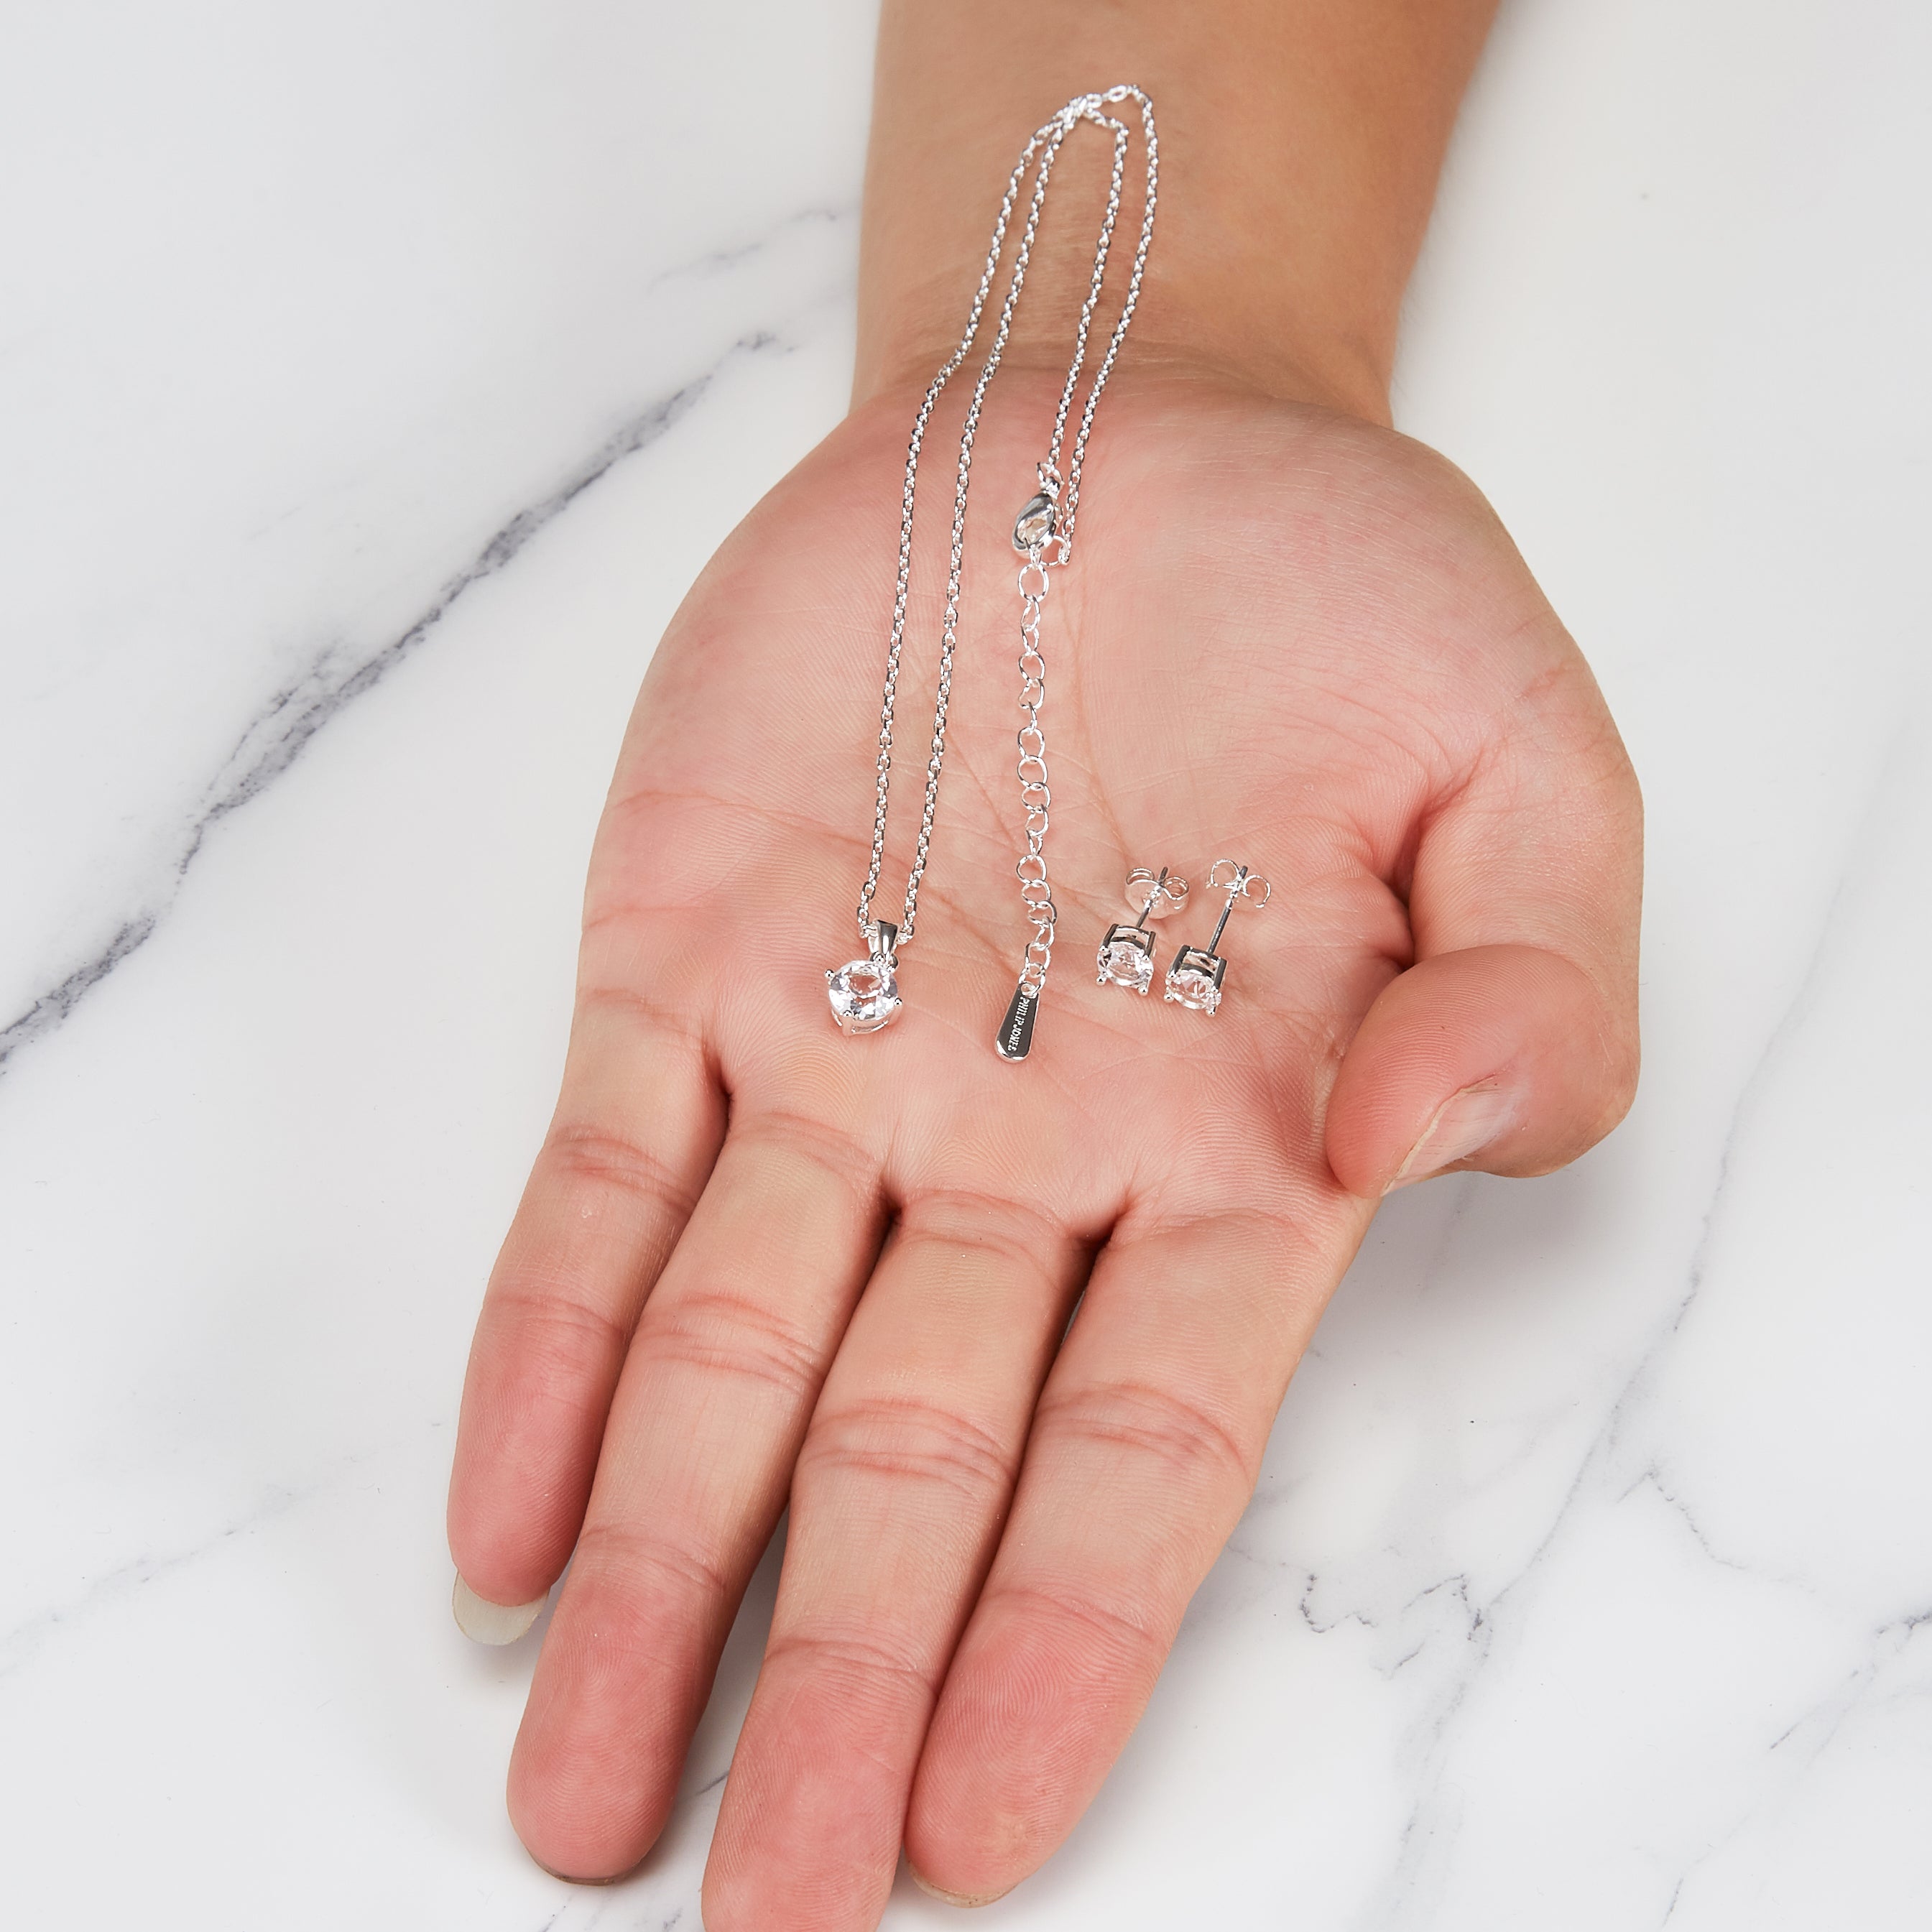 Silver Plated Round Solitaire Set Created with Zircondia® Crystals